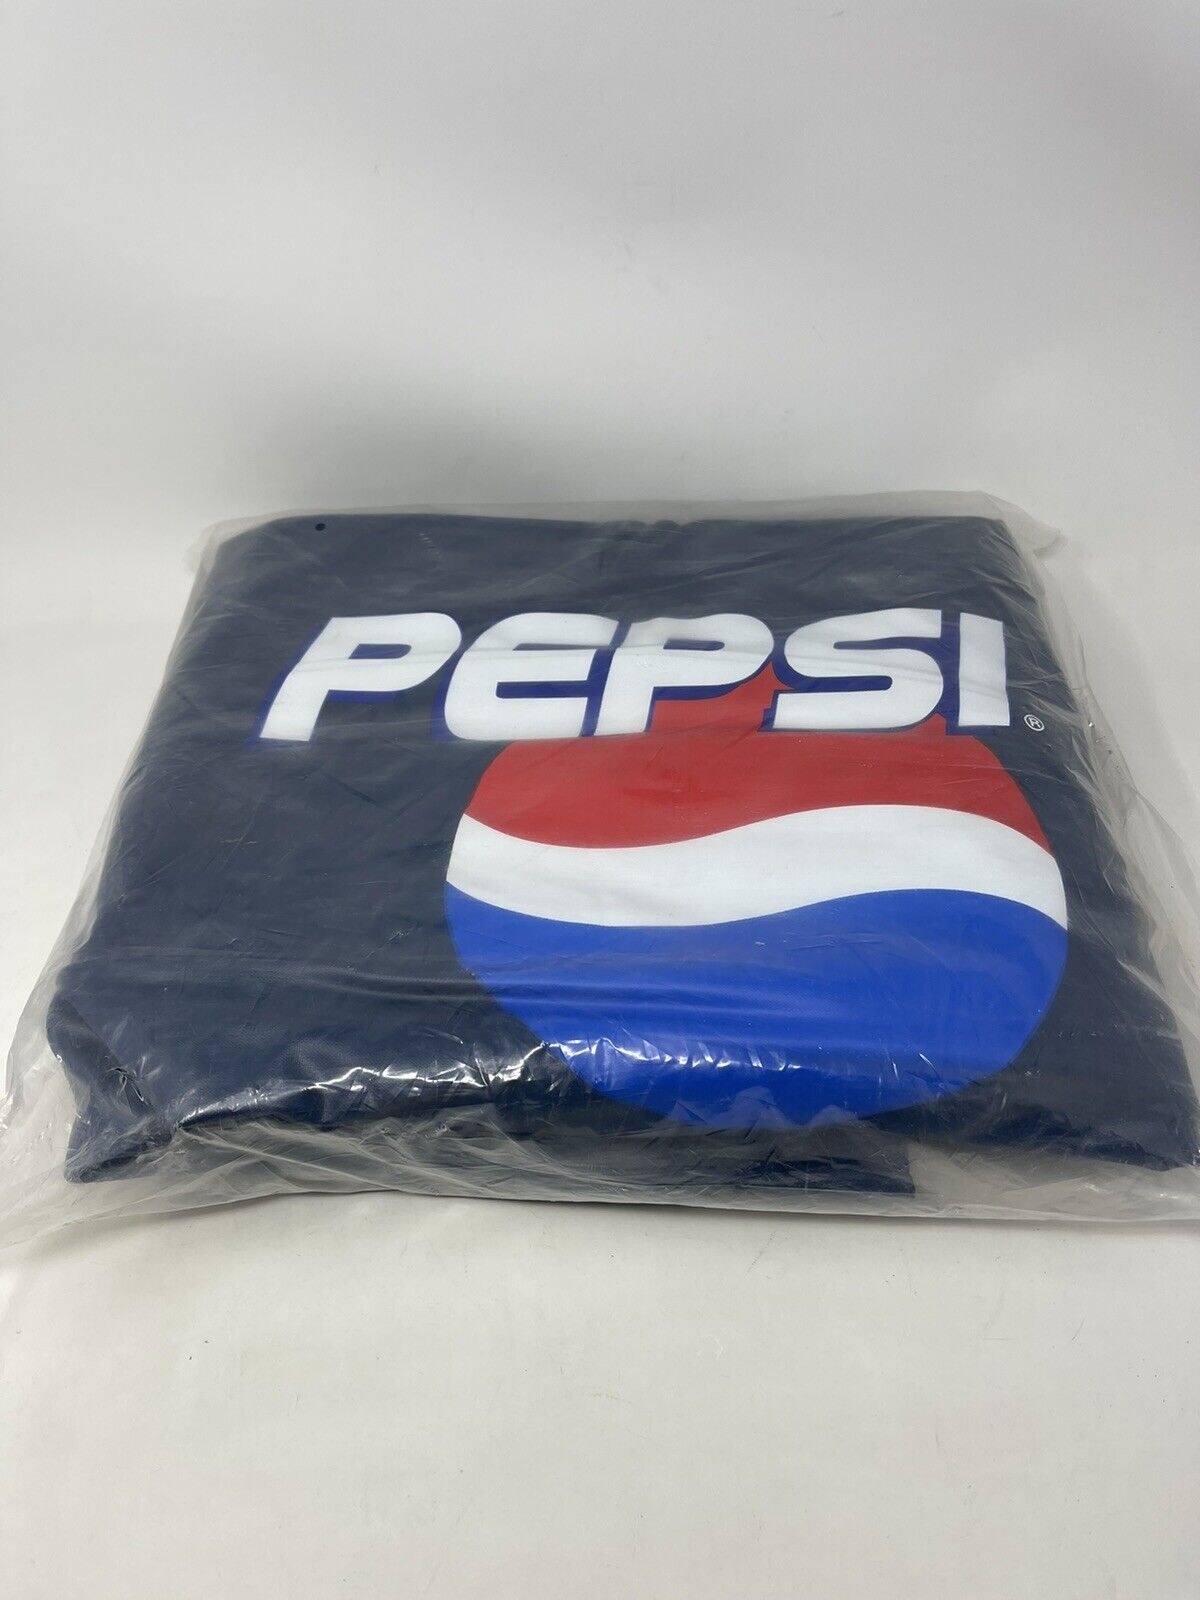 Pepsi 1998 Inflatable Chair Promotional Item By Alvimar Mfg Blue W/Logo NEW